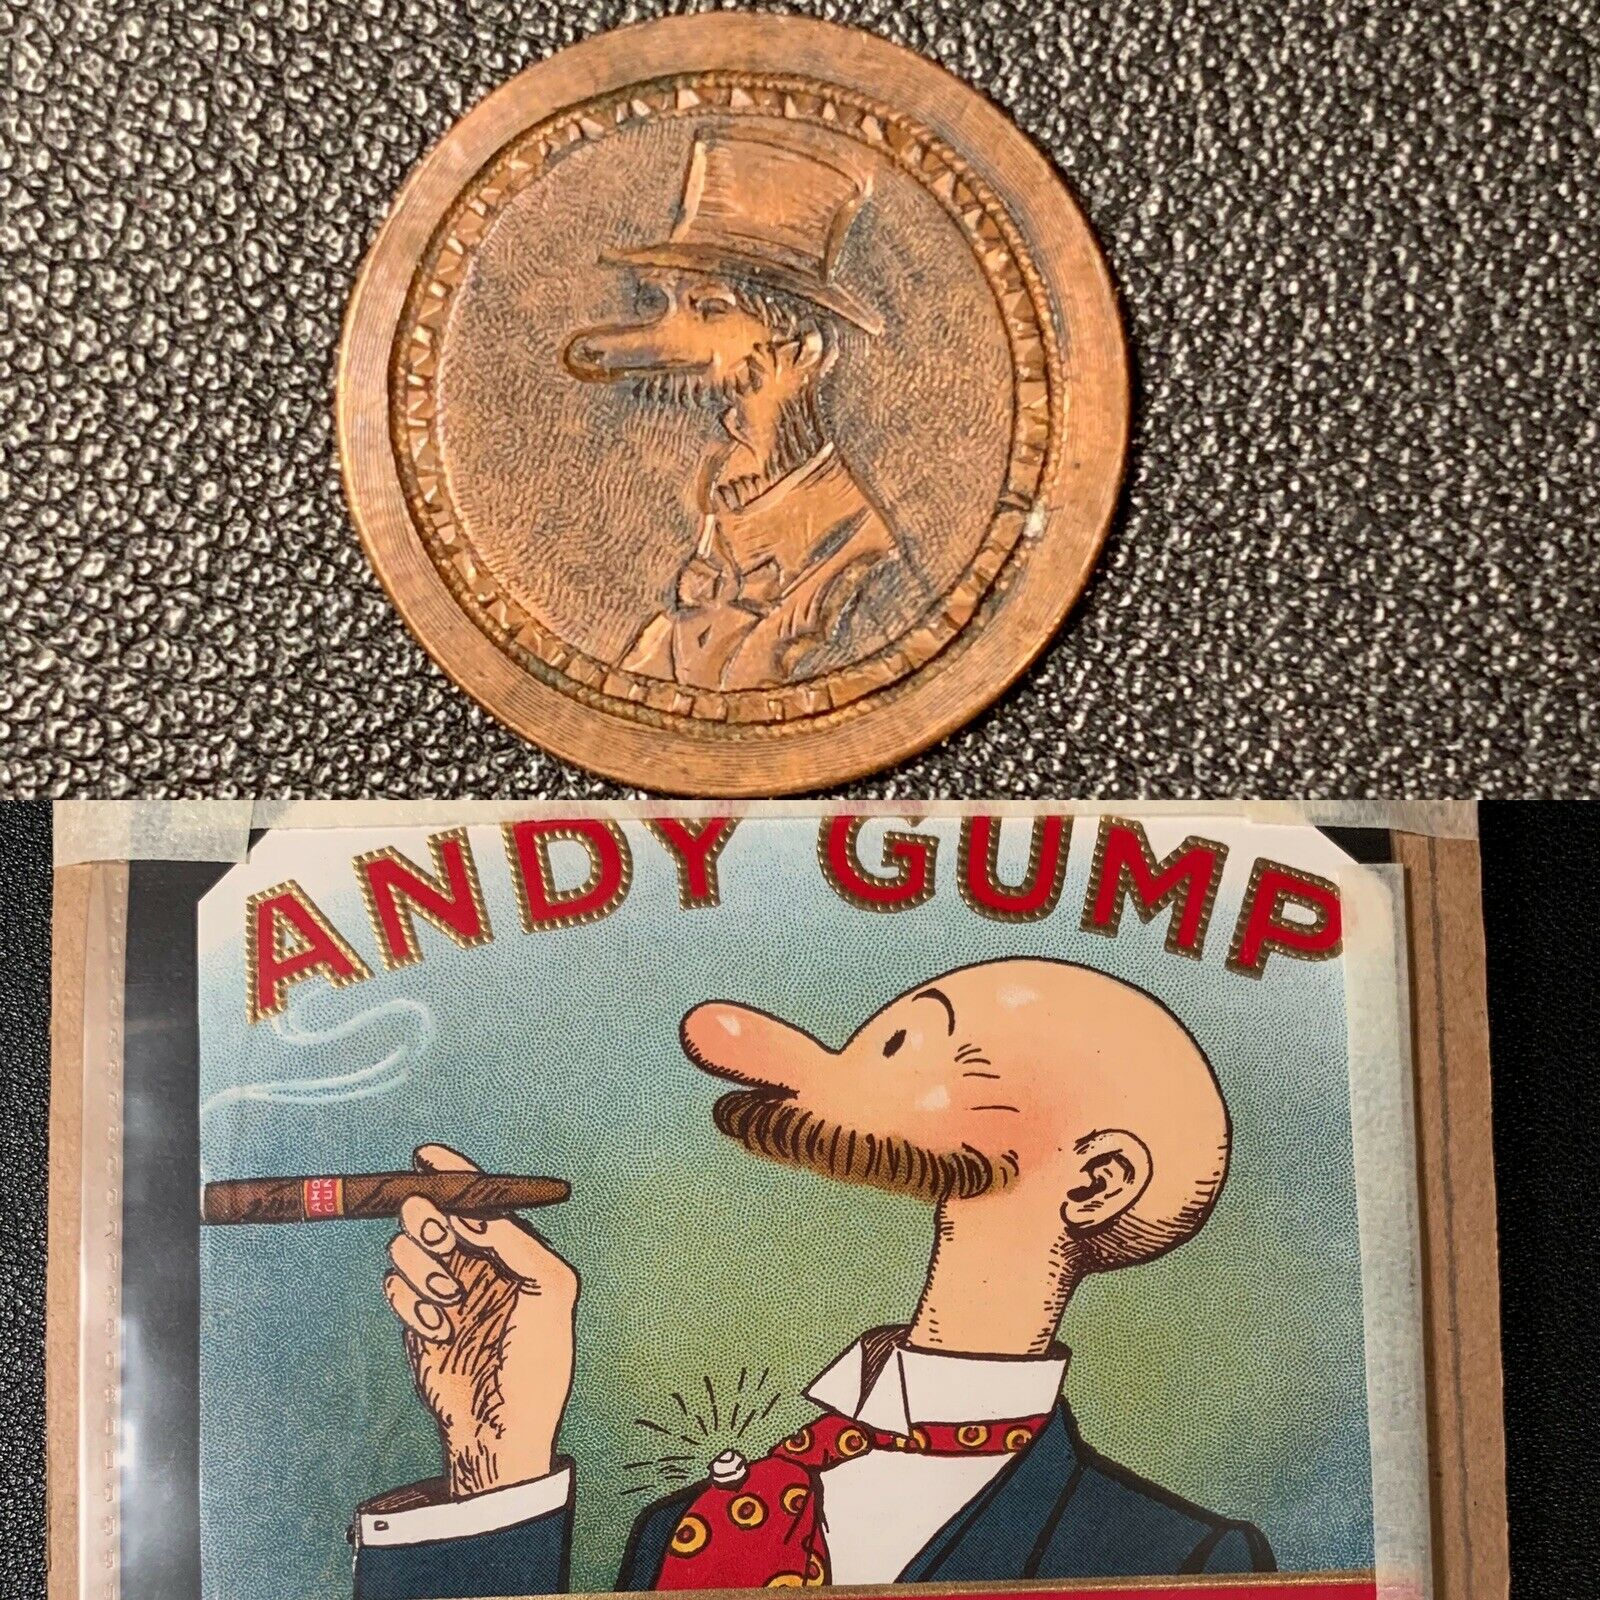 Portrait of Andy Gump Love Token and Cigar Box Advertisement RARE! Engraved Coin